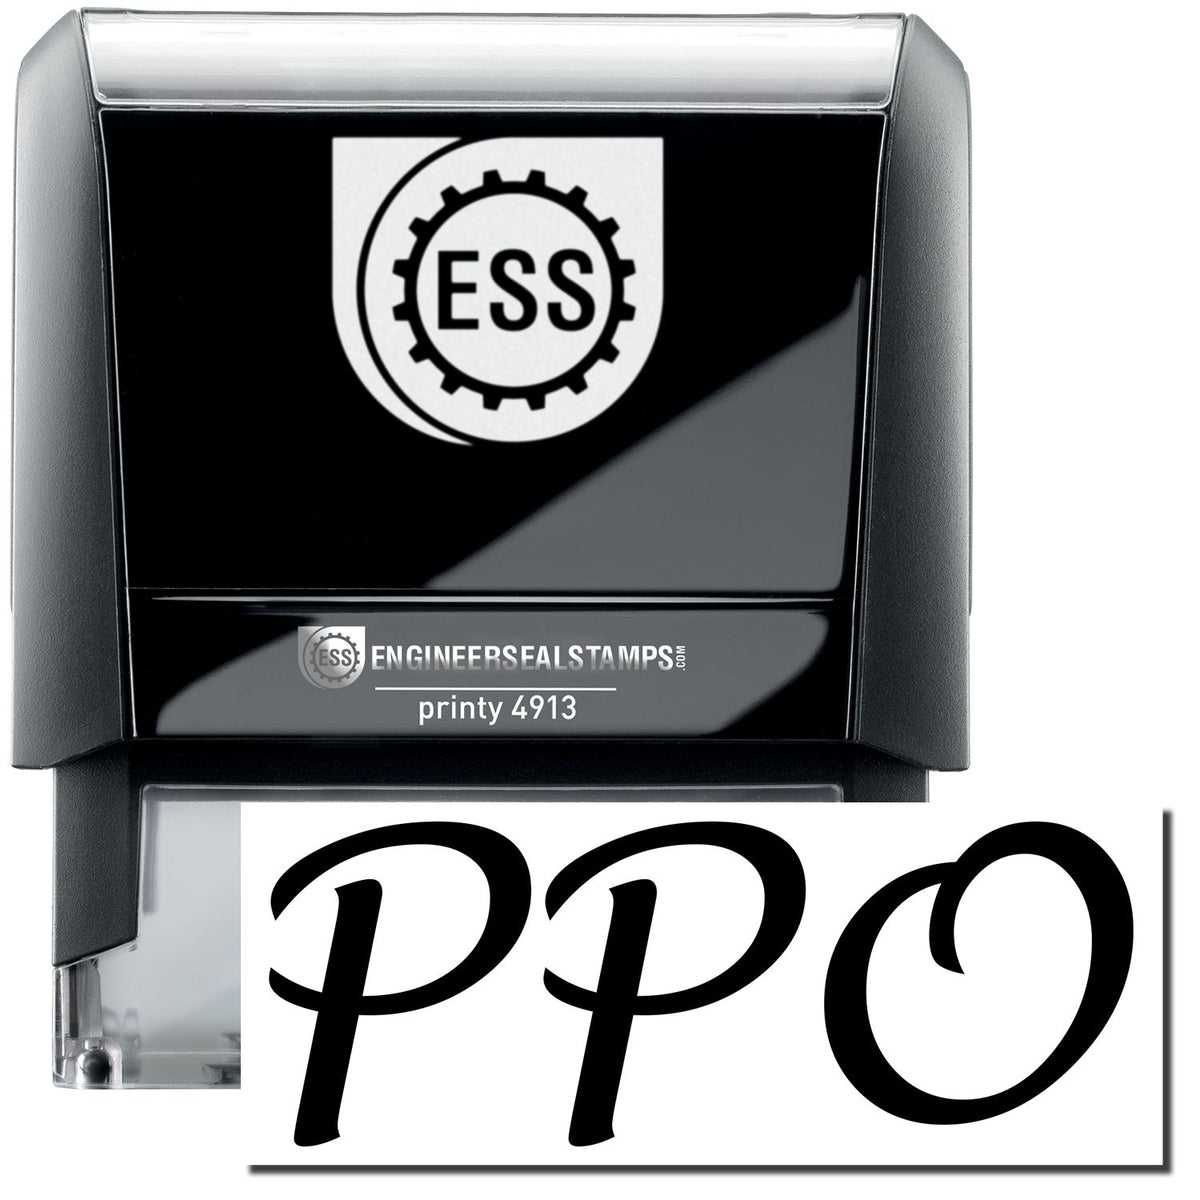 A self-inking stamp with a stamped image showing how the text &quot;PPO&quot; in a large bold font is displayed by it.